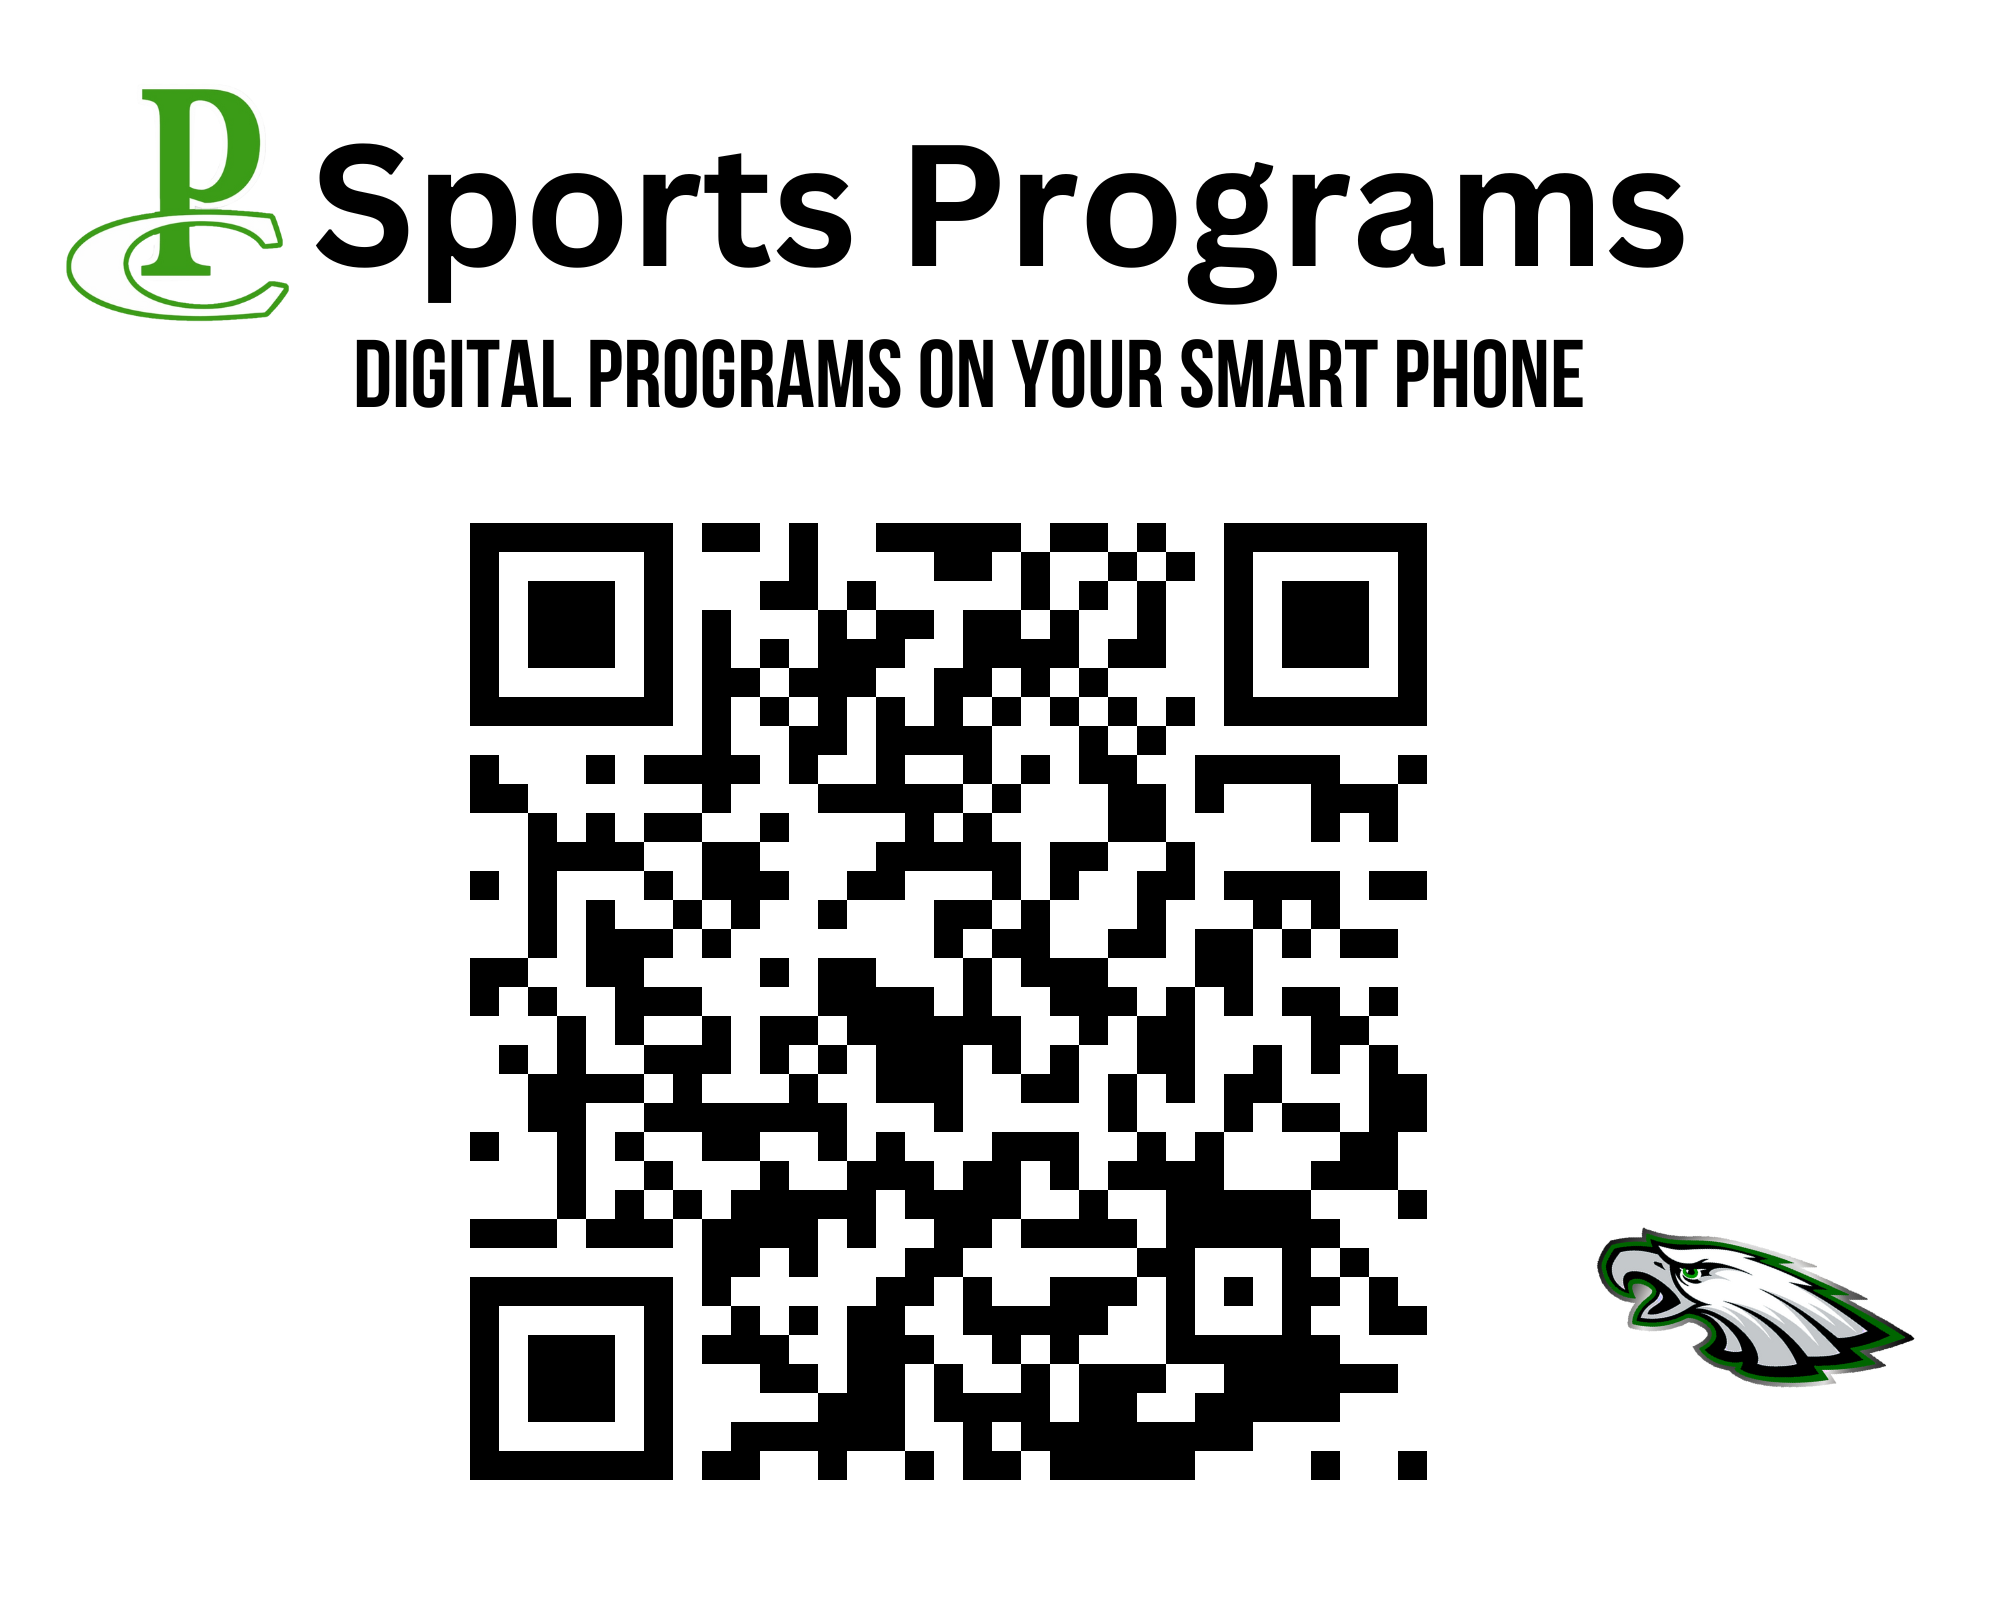 QR code to the Sports Programs Link